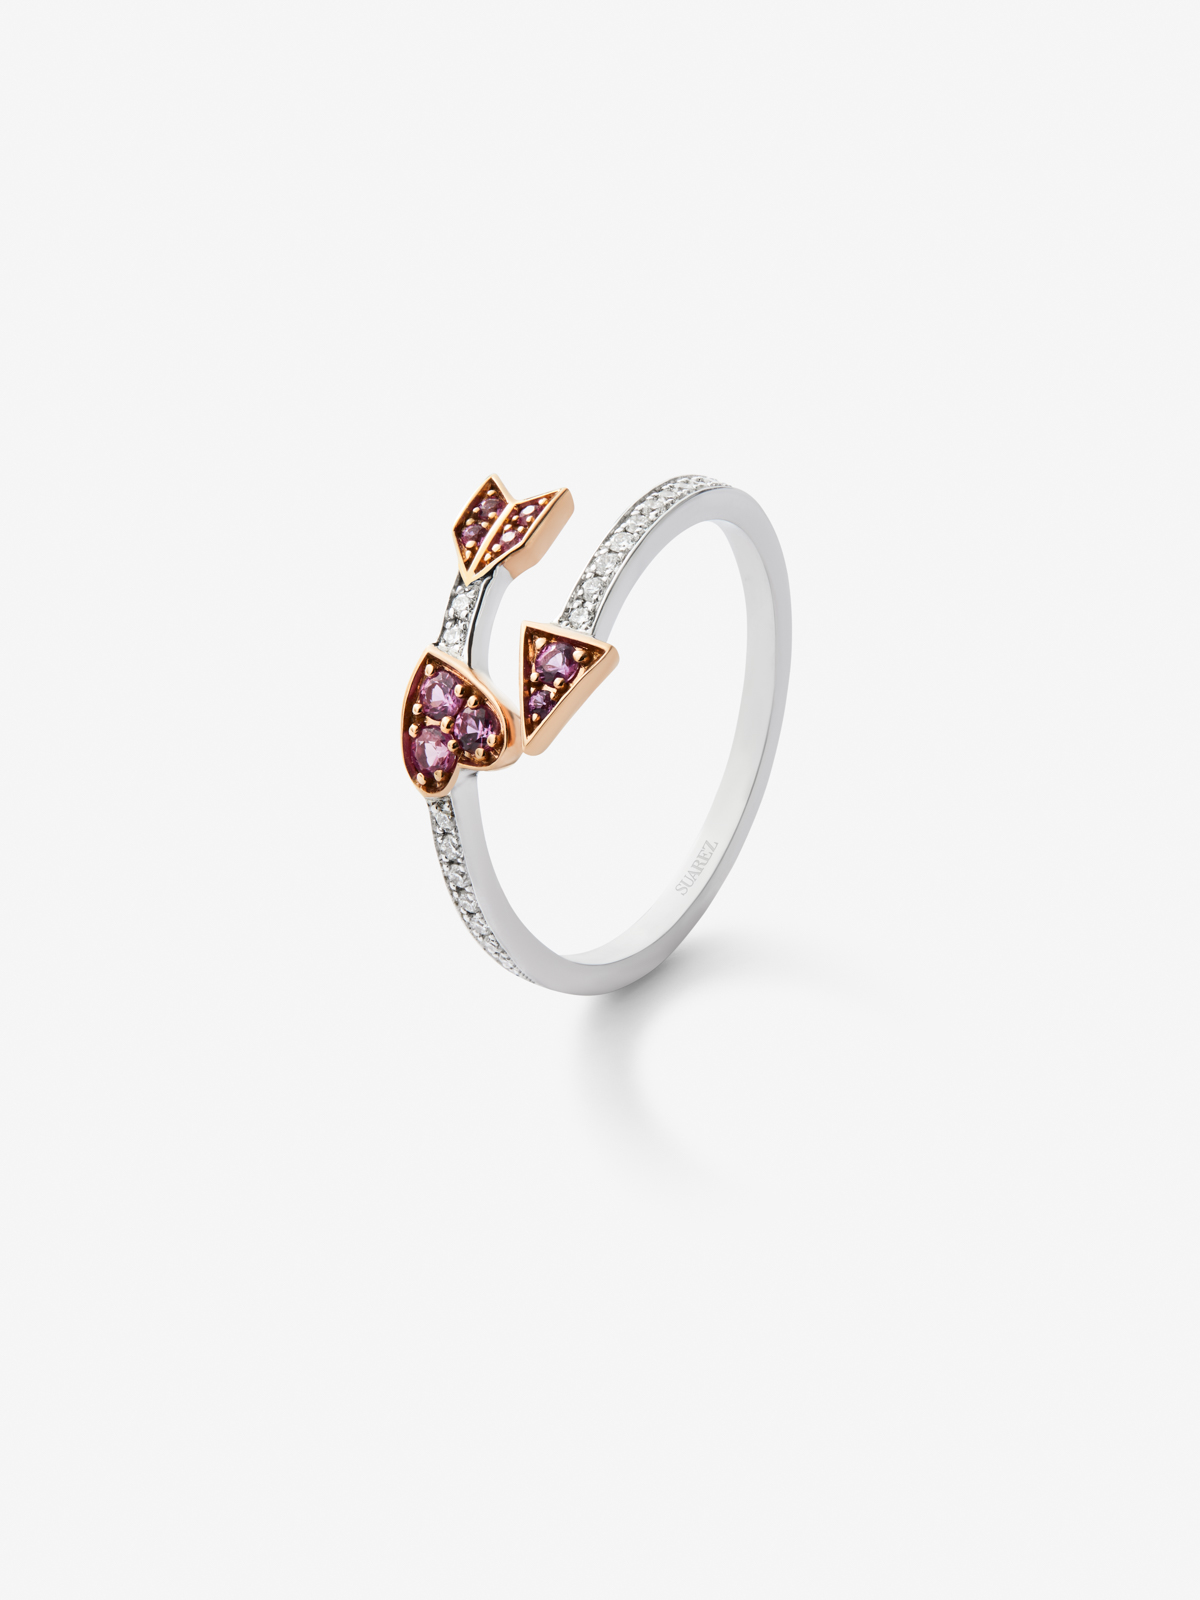 You and I of White and Pink Gold of 18K with heart and arrow, white diamonds and pink sapphires